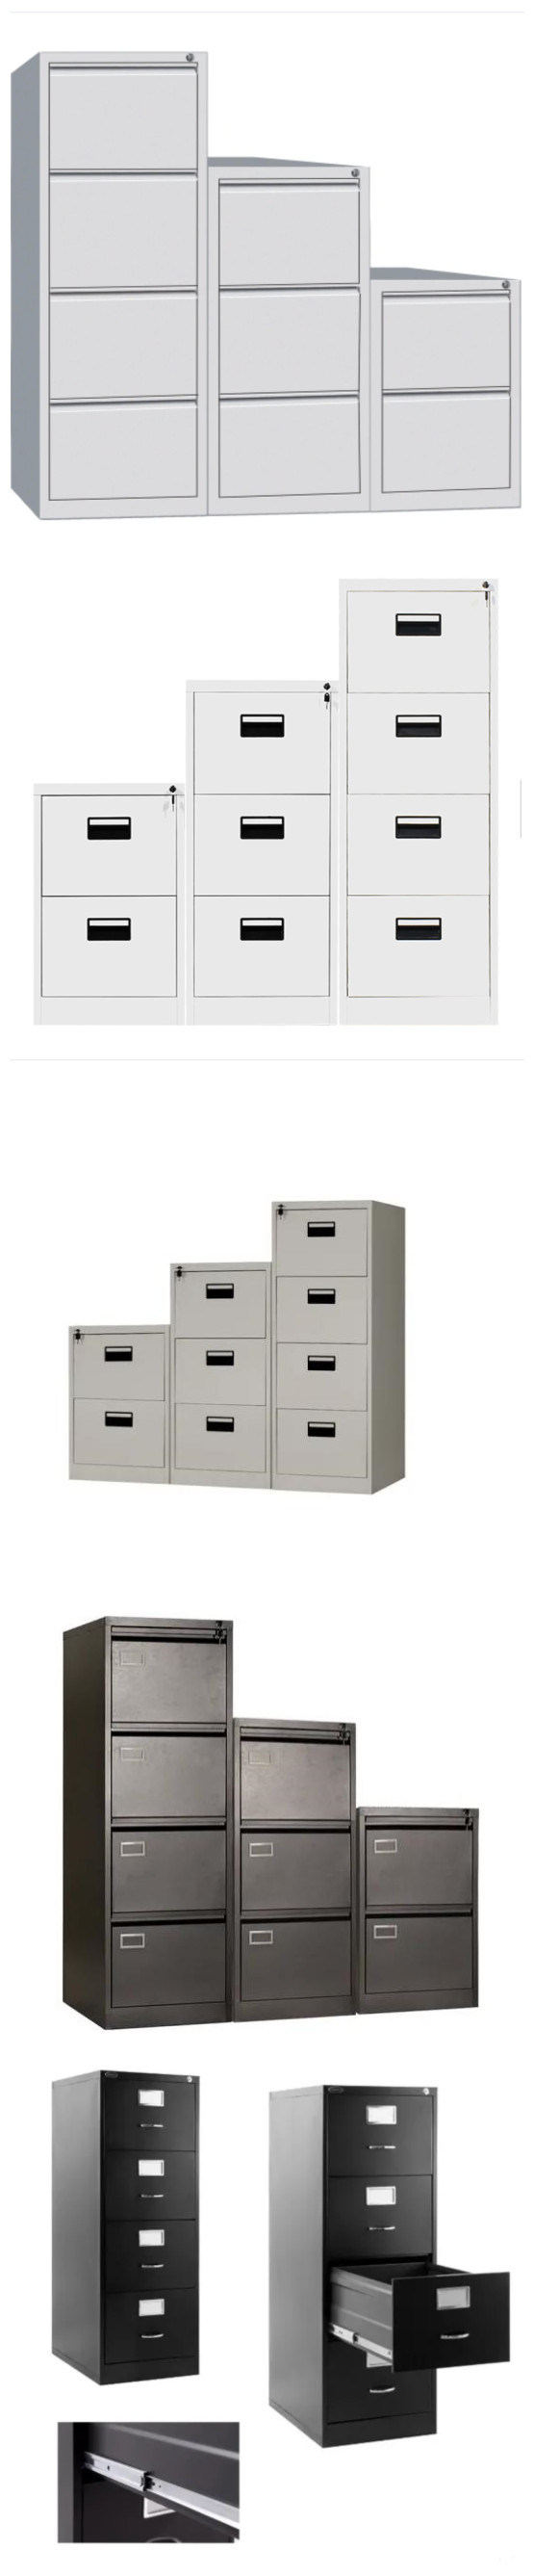 Mobile Metal Double Drawers Storage Cabinet High Quality Office 5 Drawers Vertical File Cabinet